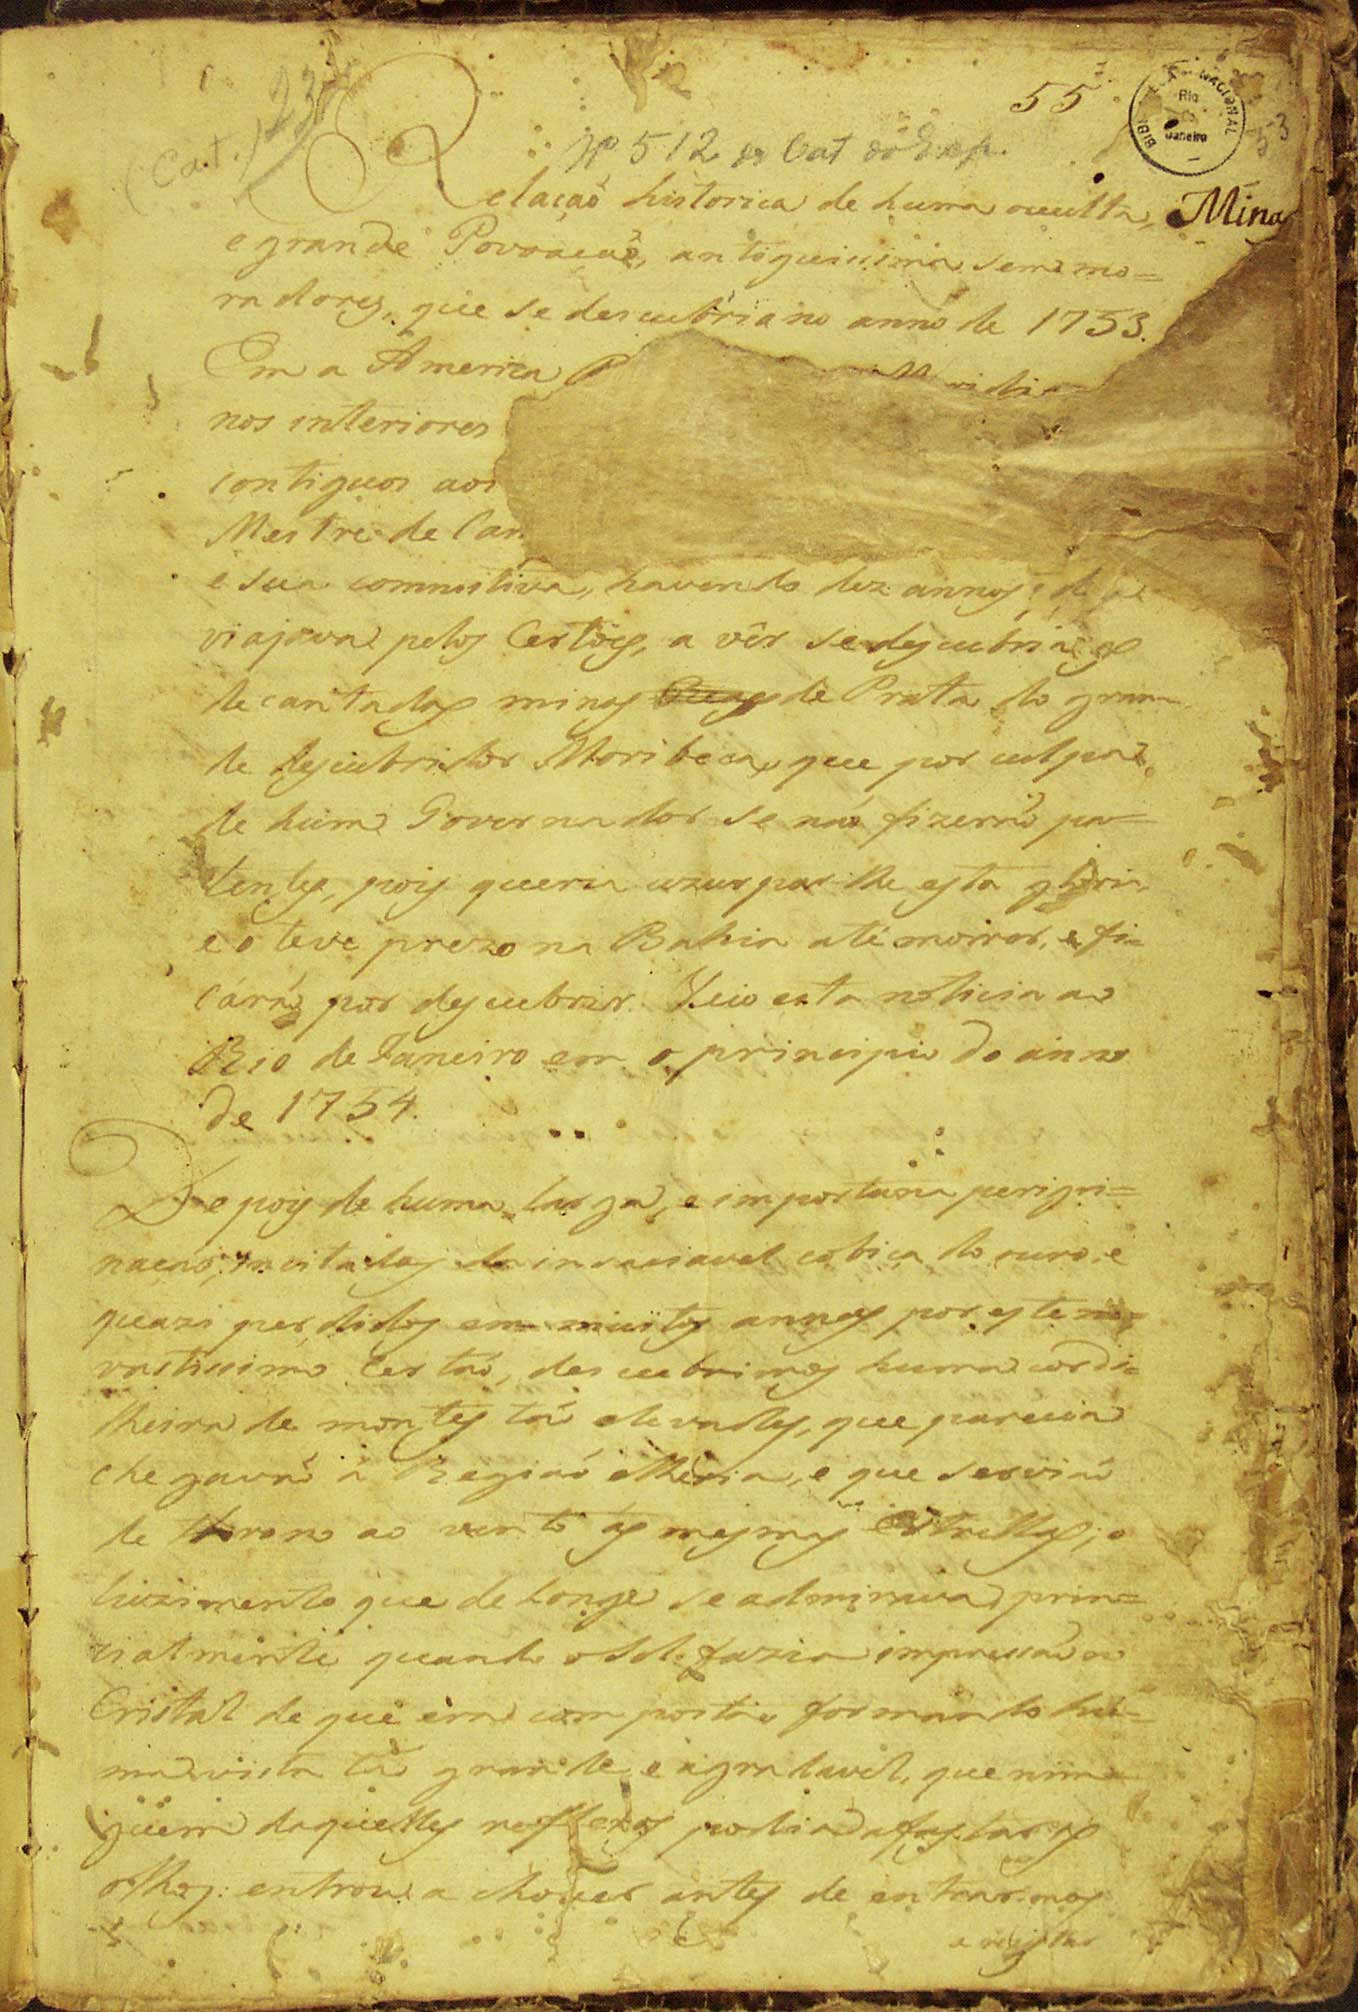 First page of Manuscript 512. Image Credit: Wikimedia Commons.